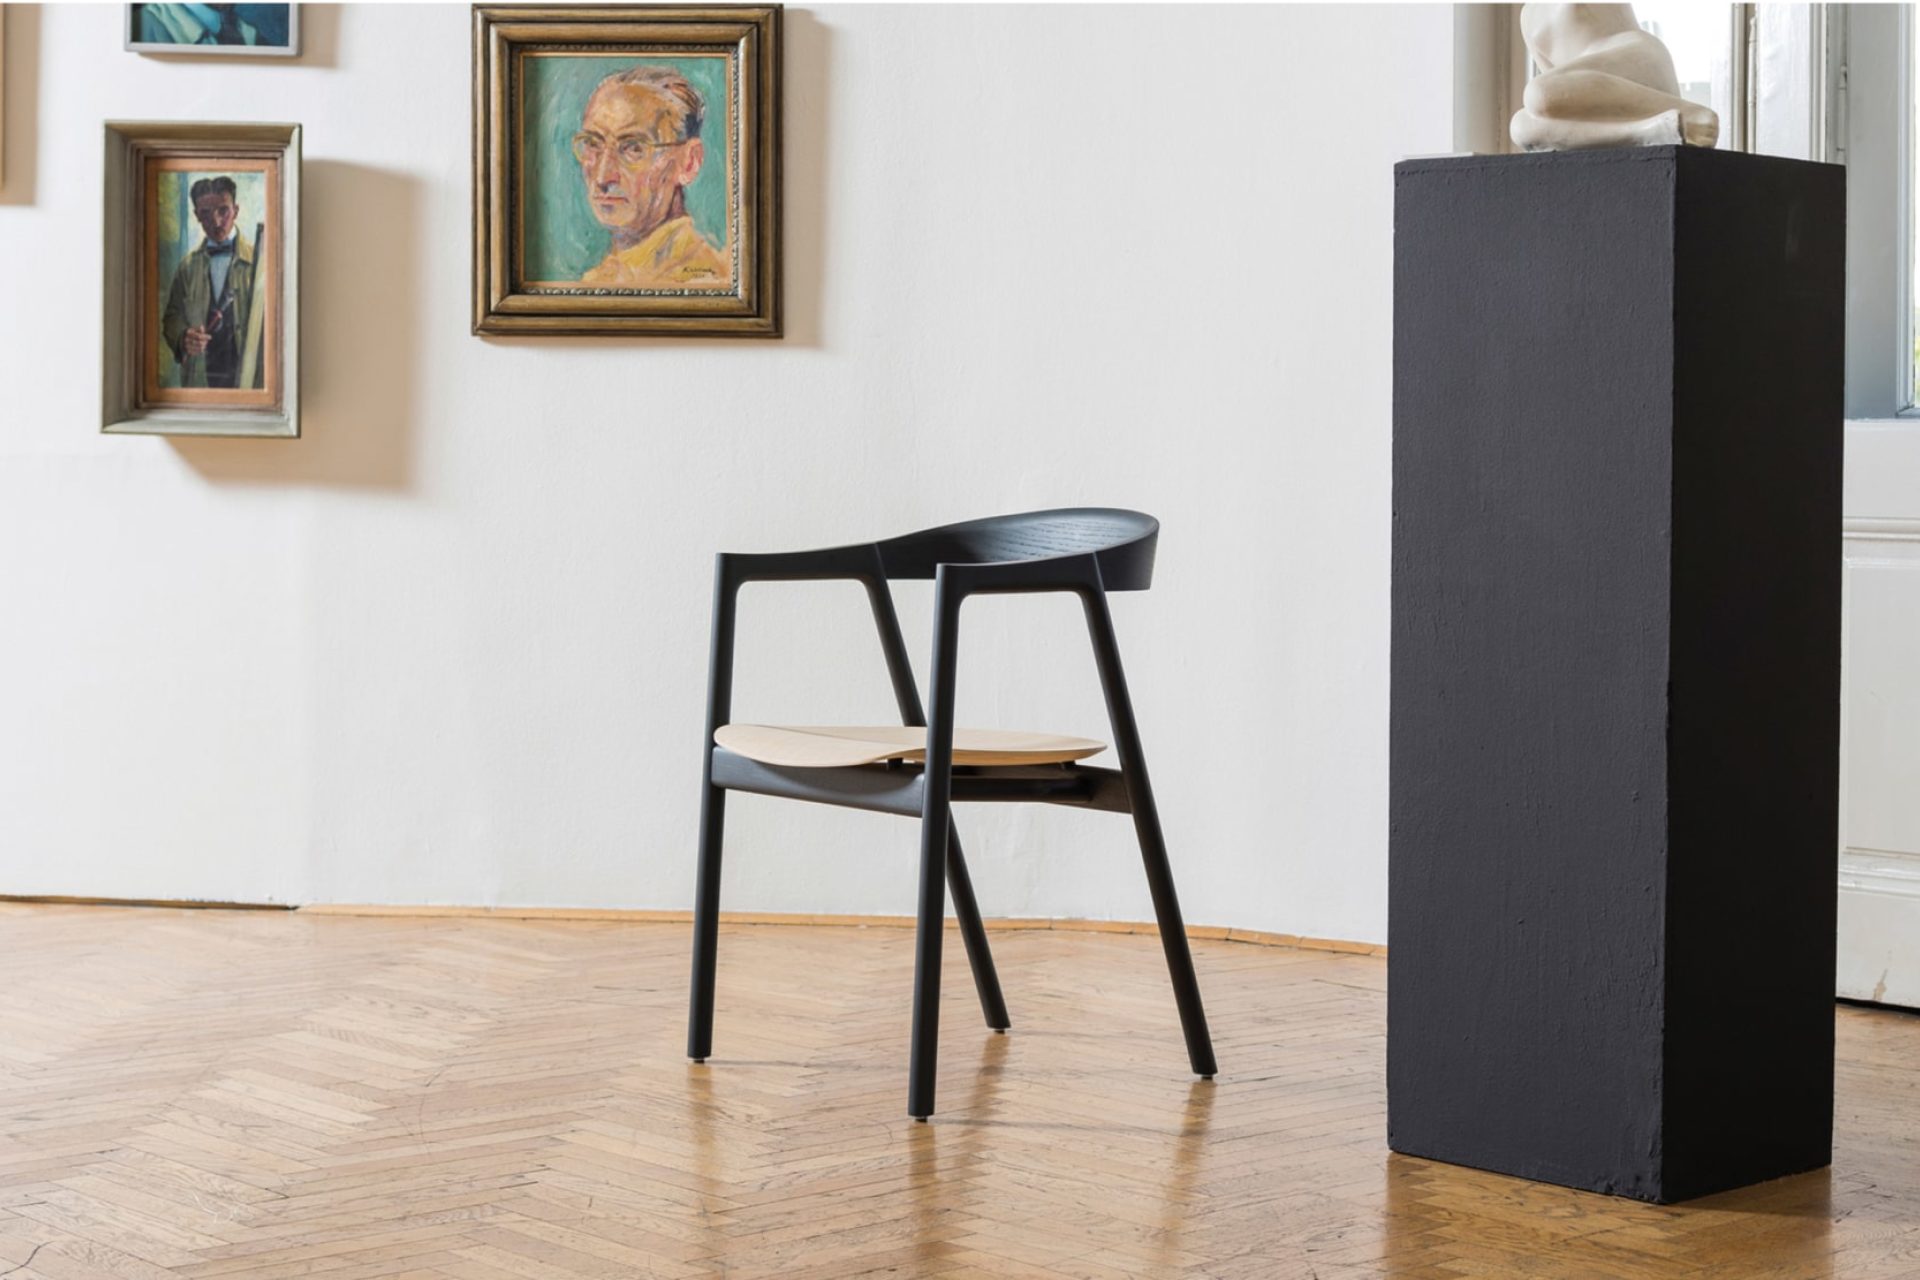 Solid oak chair in black with a rounded design